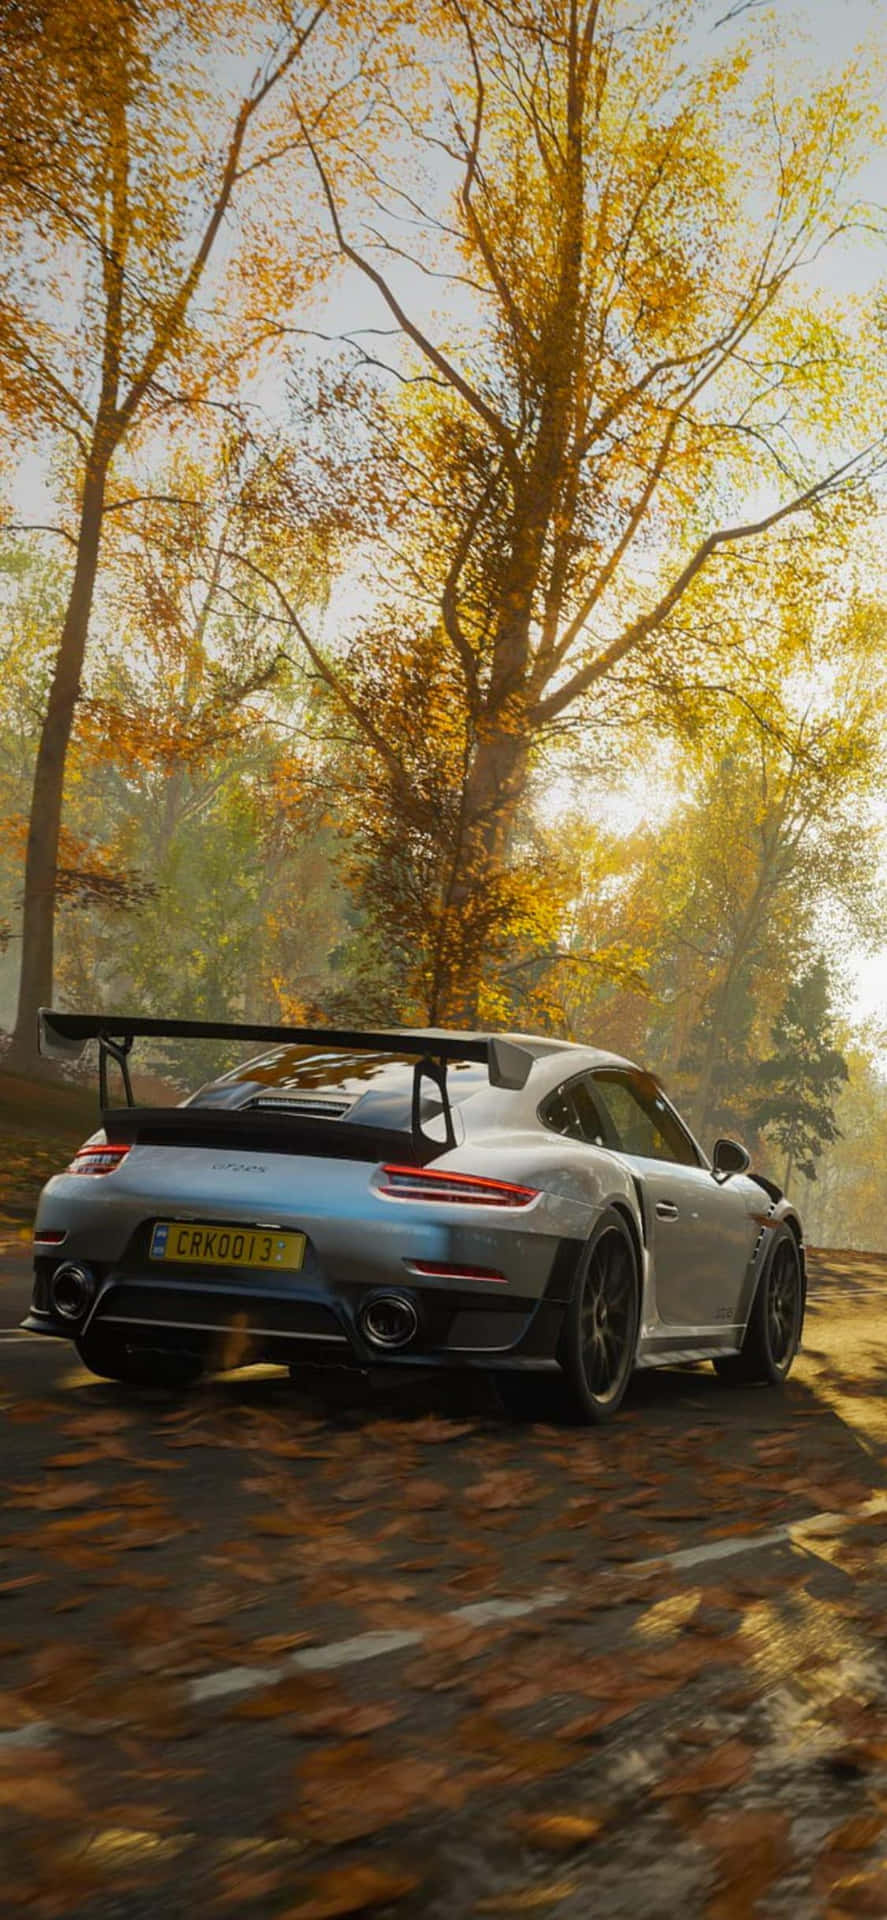 Conquer the Race Tracks with Iphone Xs&Forza Horizon 4